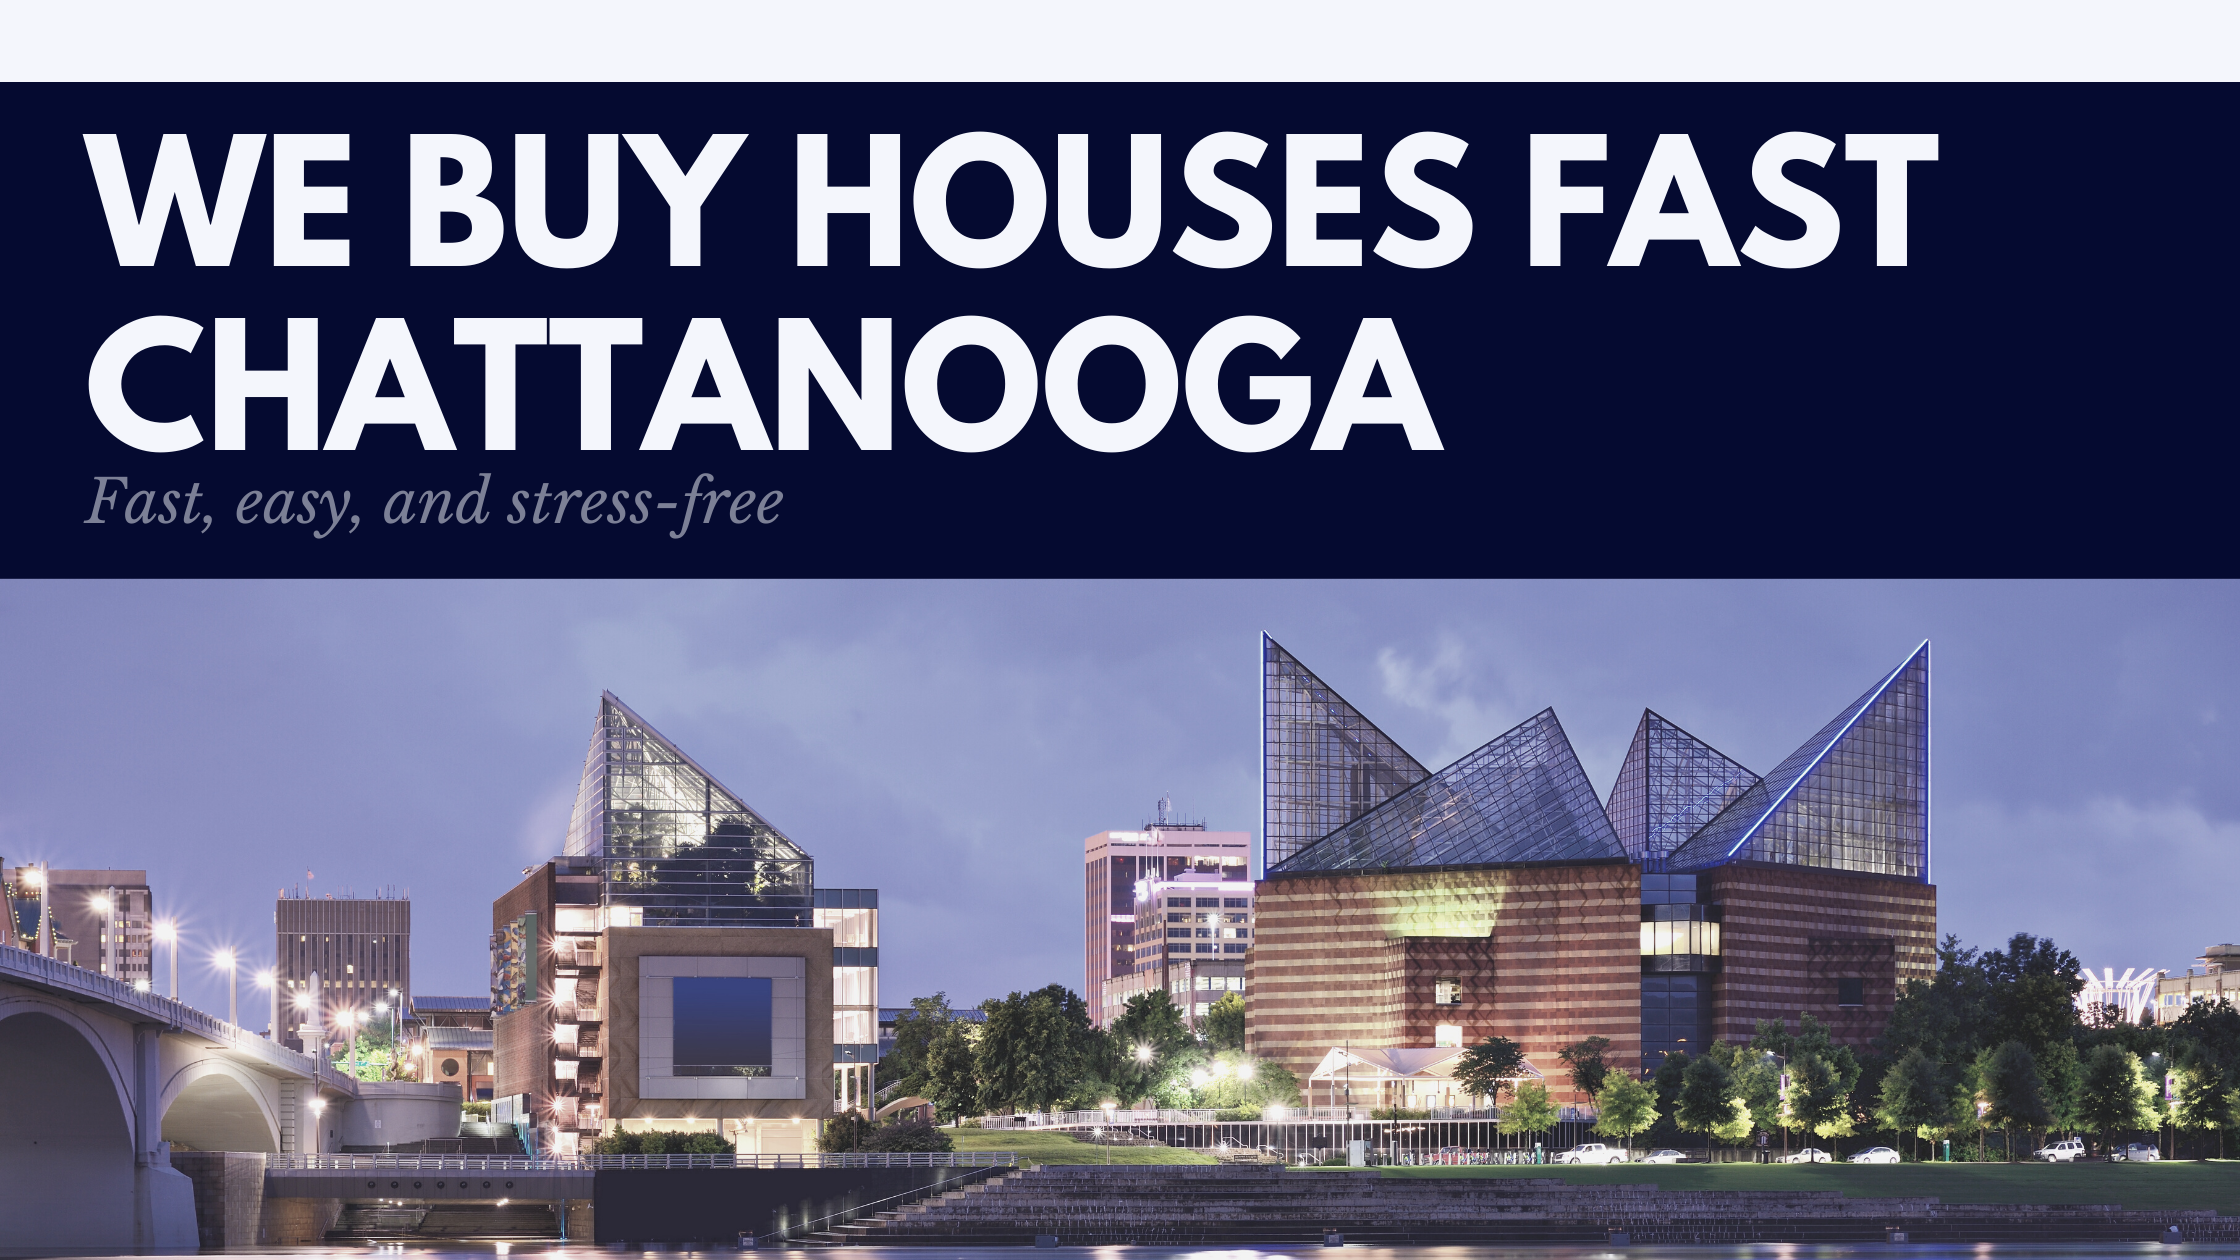 We buy houses fast Chattanooga